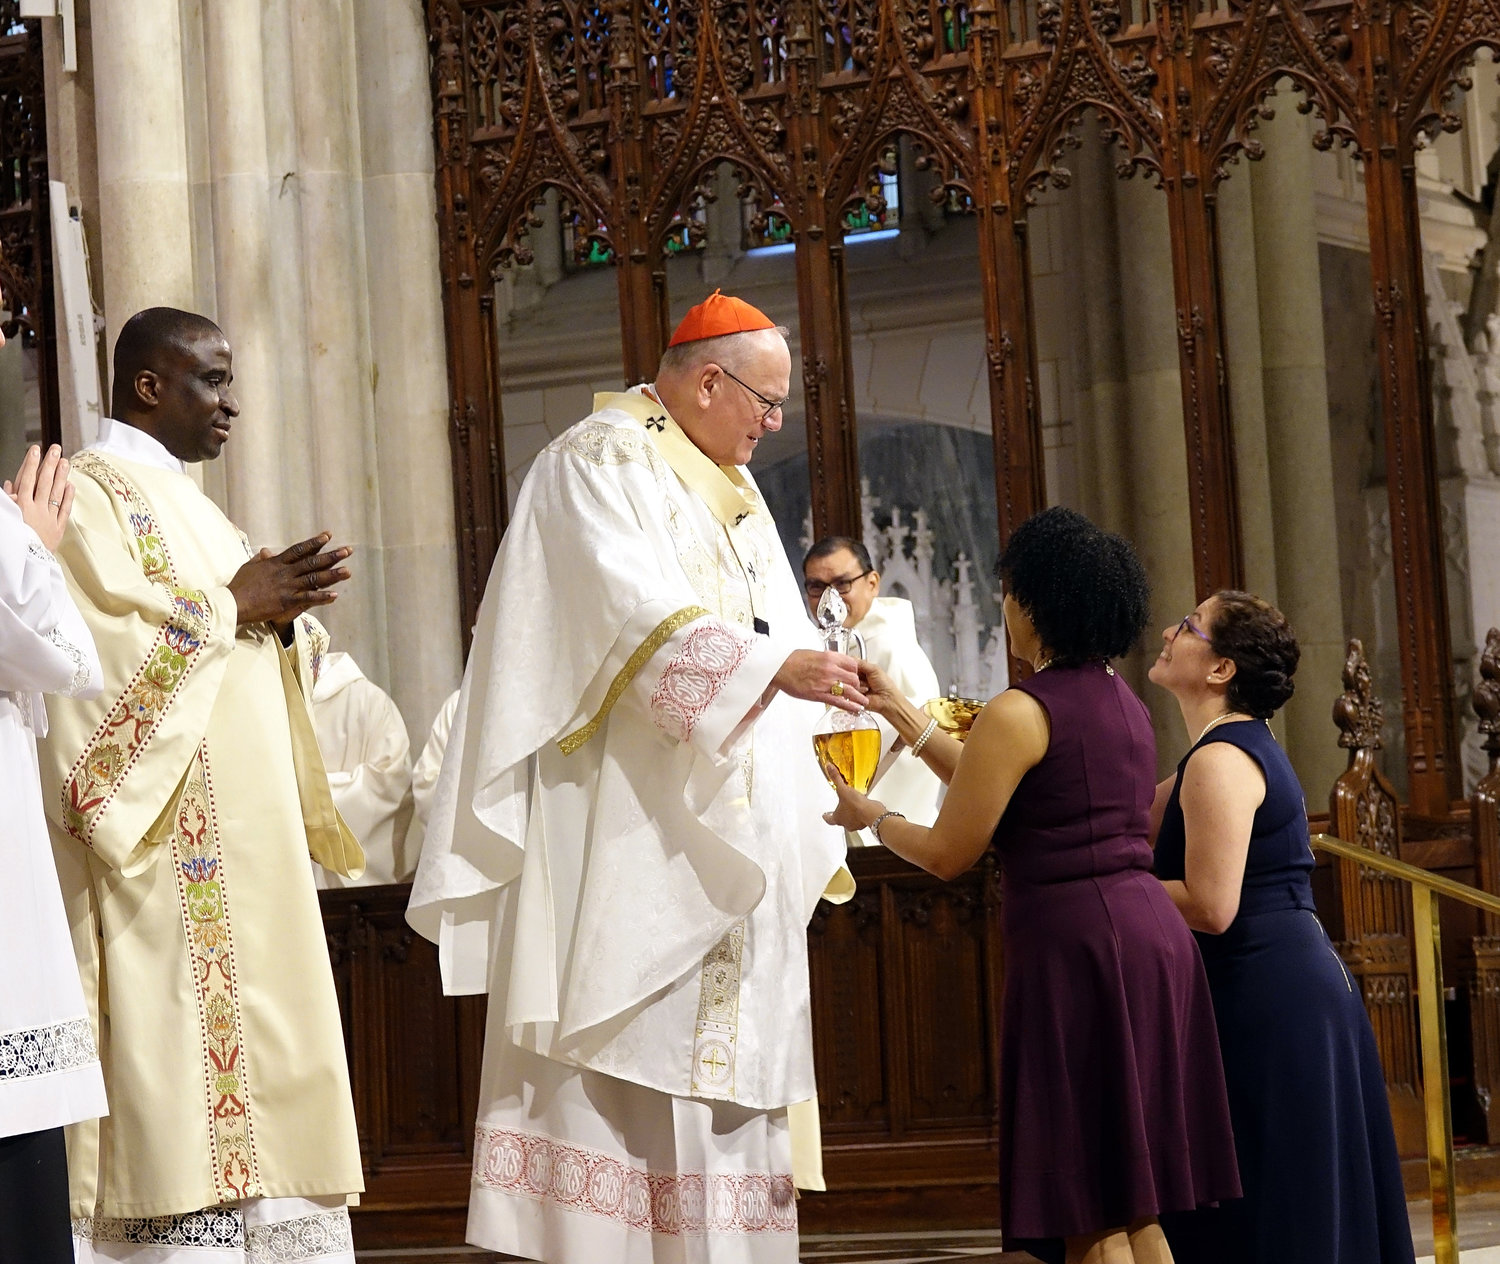 Family members of the new deacons present the offertory gifts to Cardinal Dolan assisted by Deacon Asiamah.